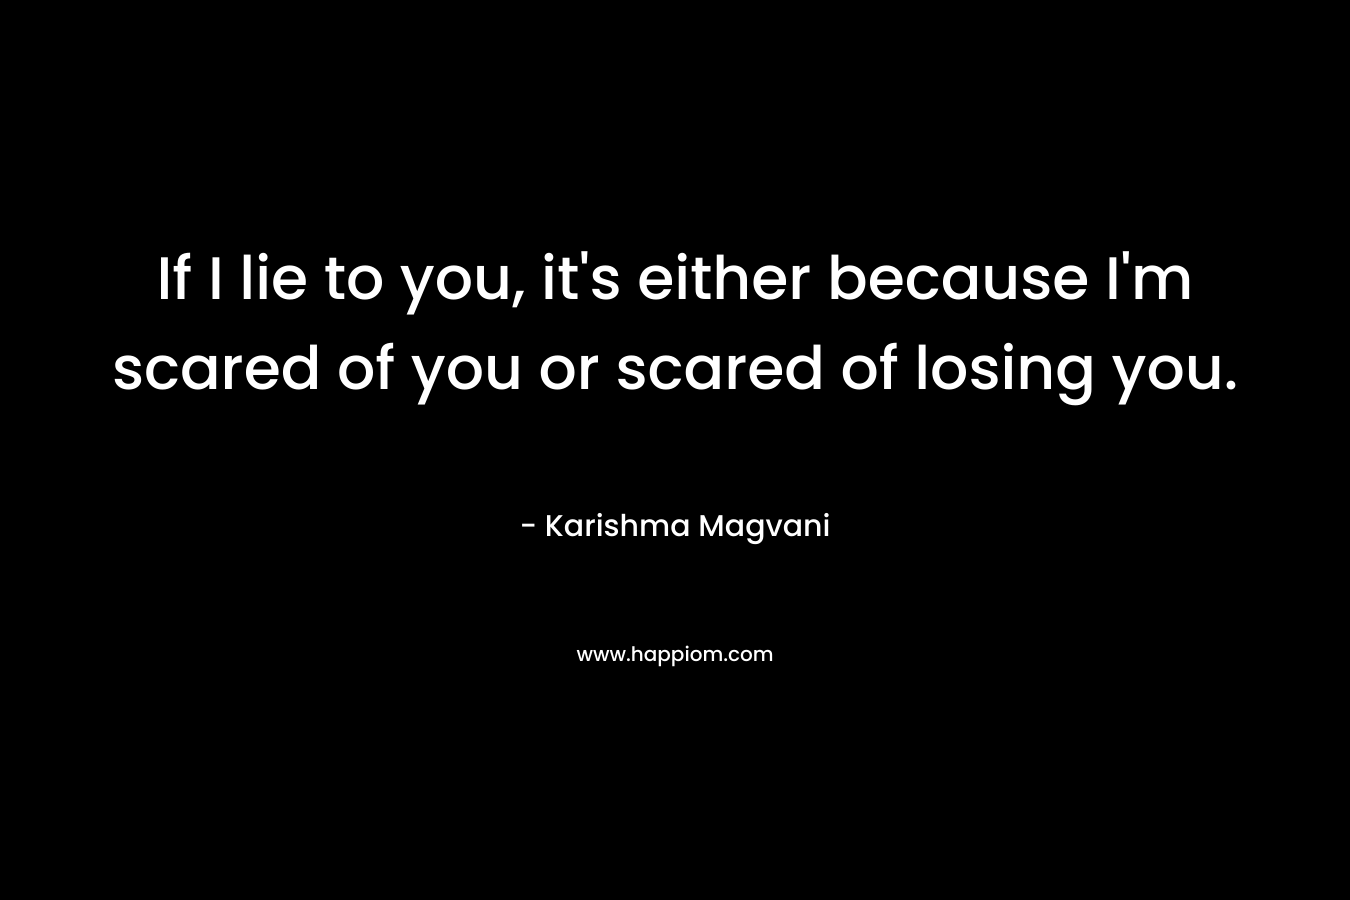 If I lie to you, it’s either because I’m scared of you or scared of losing you. – Karishma Magvani